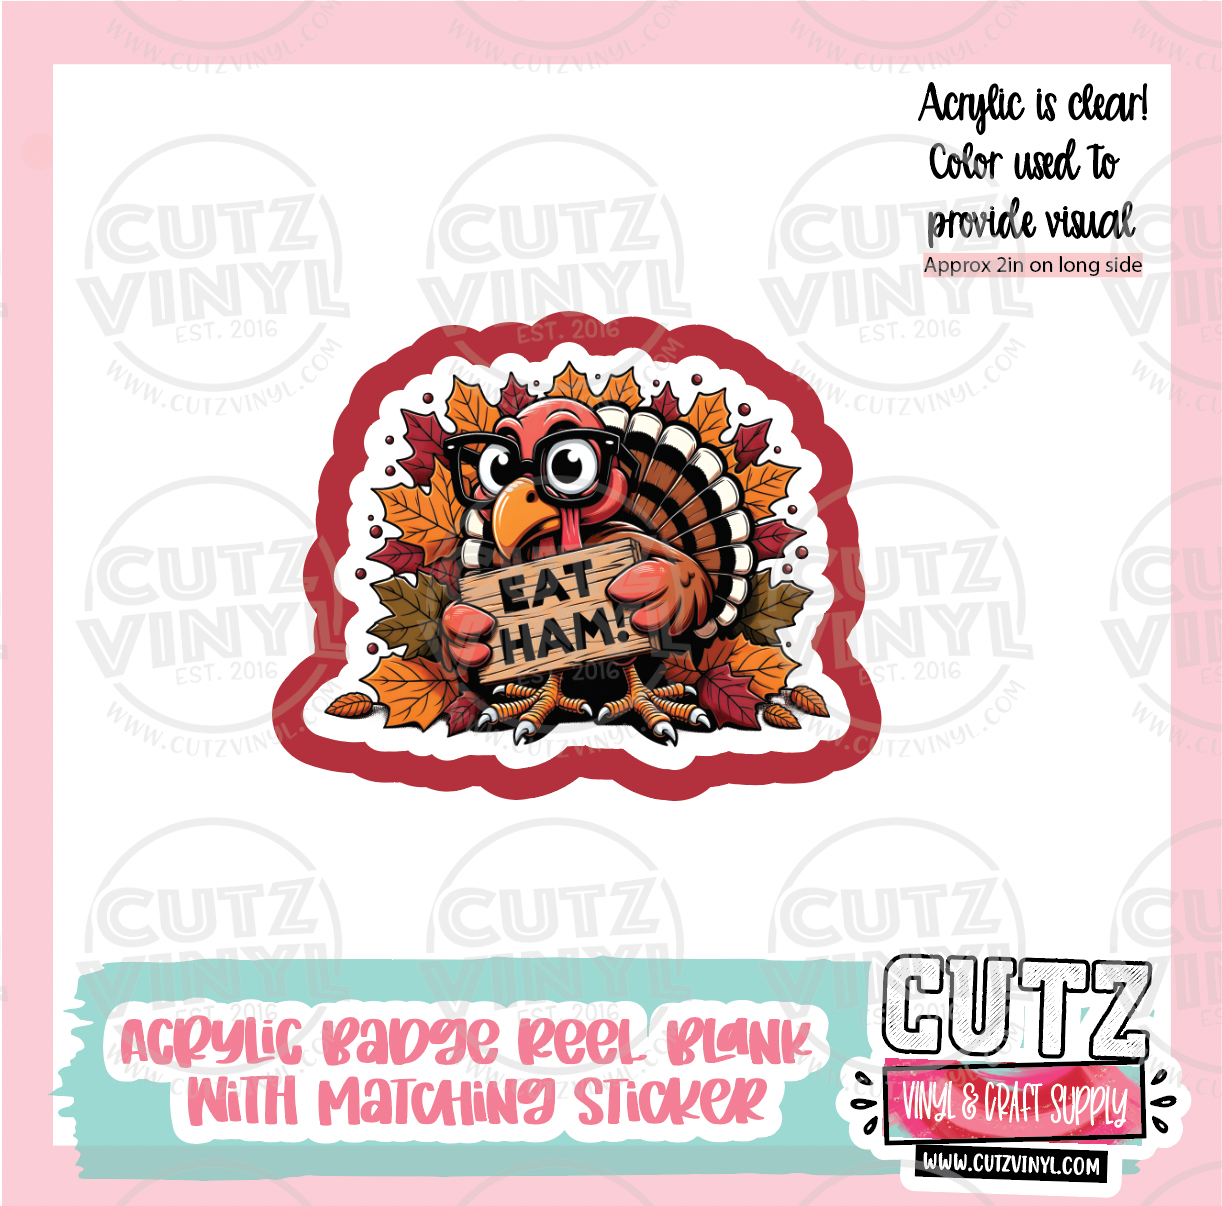 Cheaper Than Therapy - Acrylic Badge Reel Blank and Matching Sticker – Cutz  Vinyl and Craft Supplies